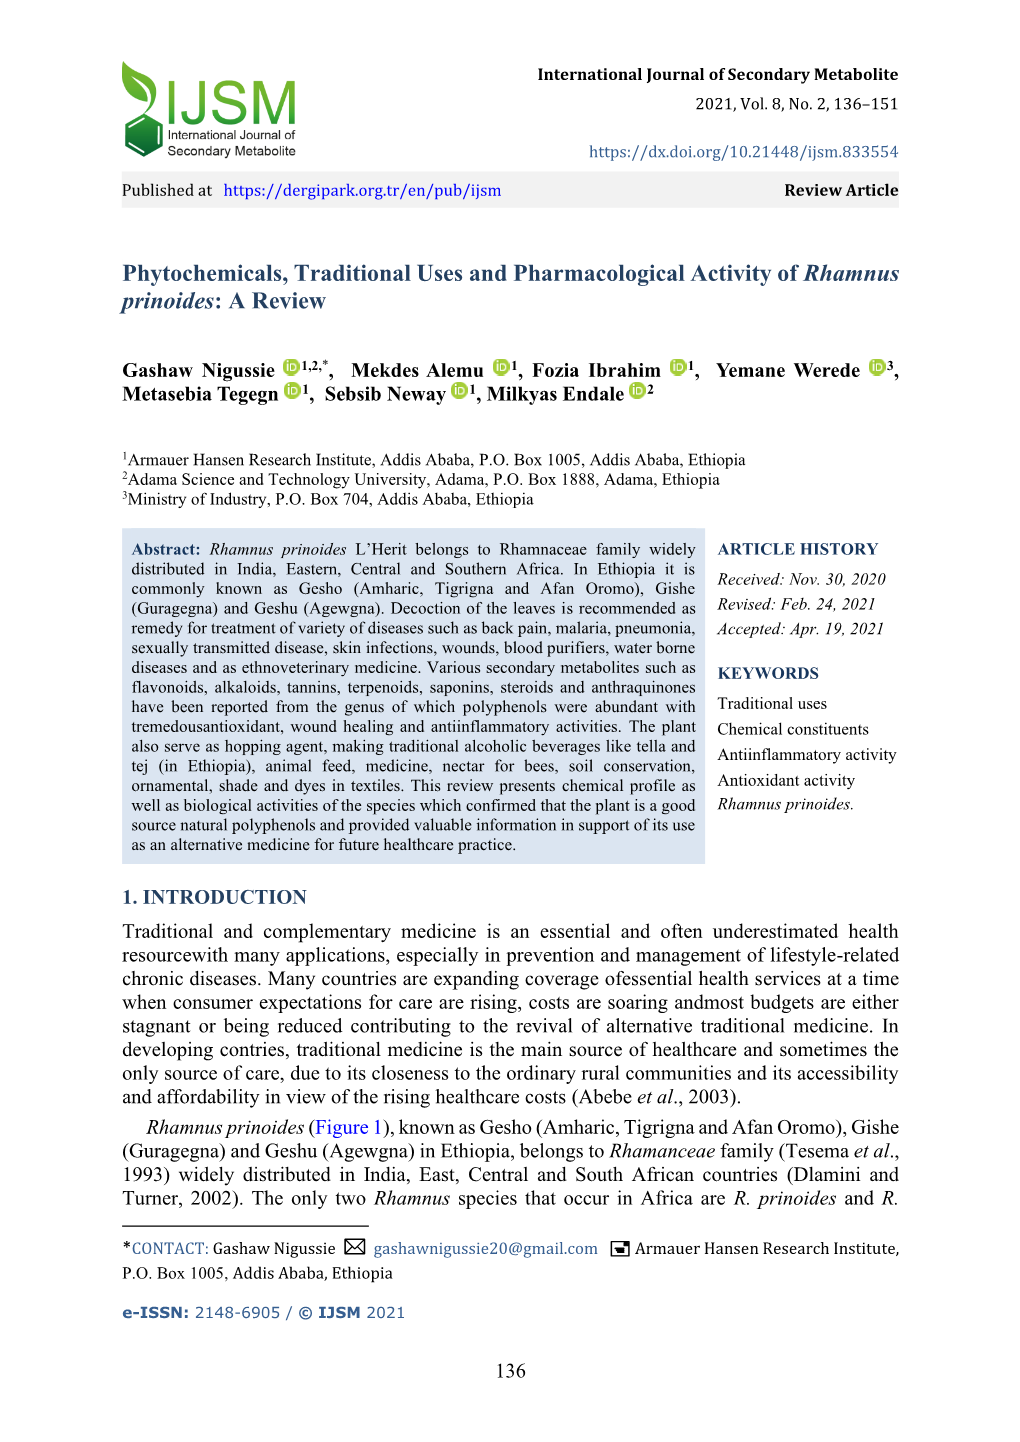 Phytochemicals, Traditional Uses and Pharmacological Activity of Rhamnus Prinoides: a Review